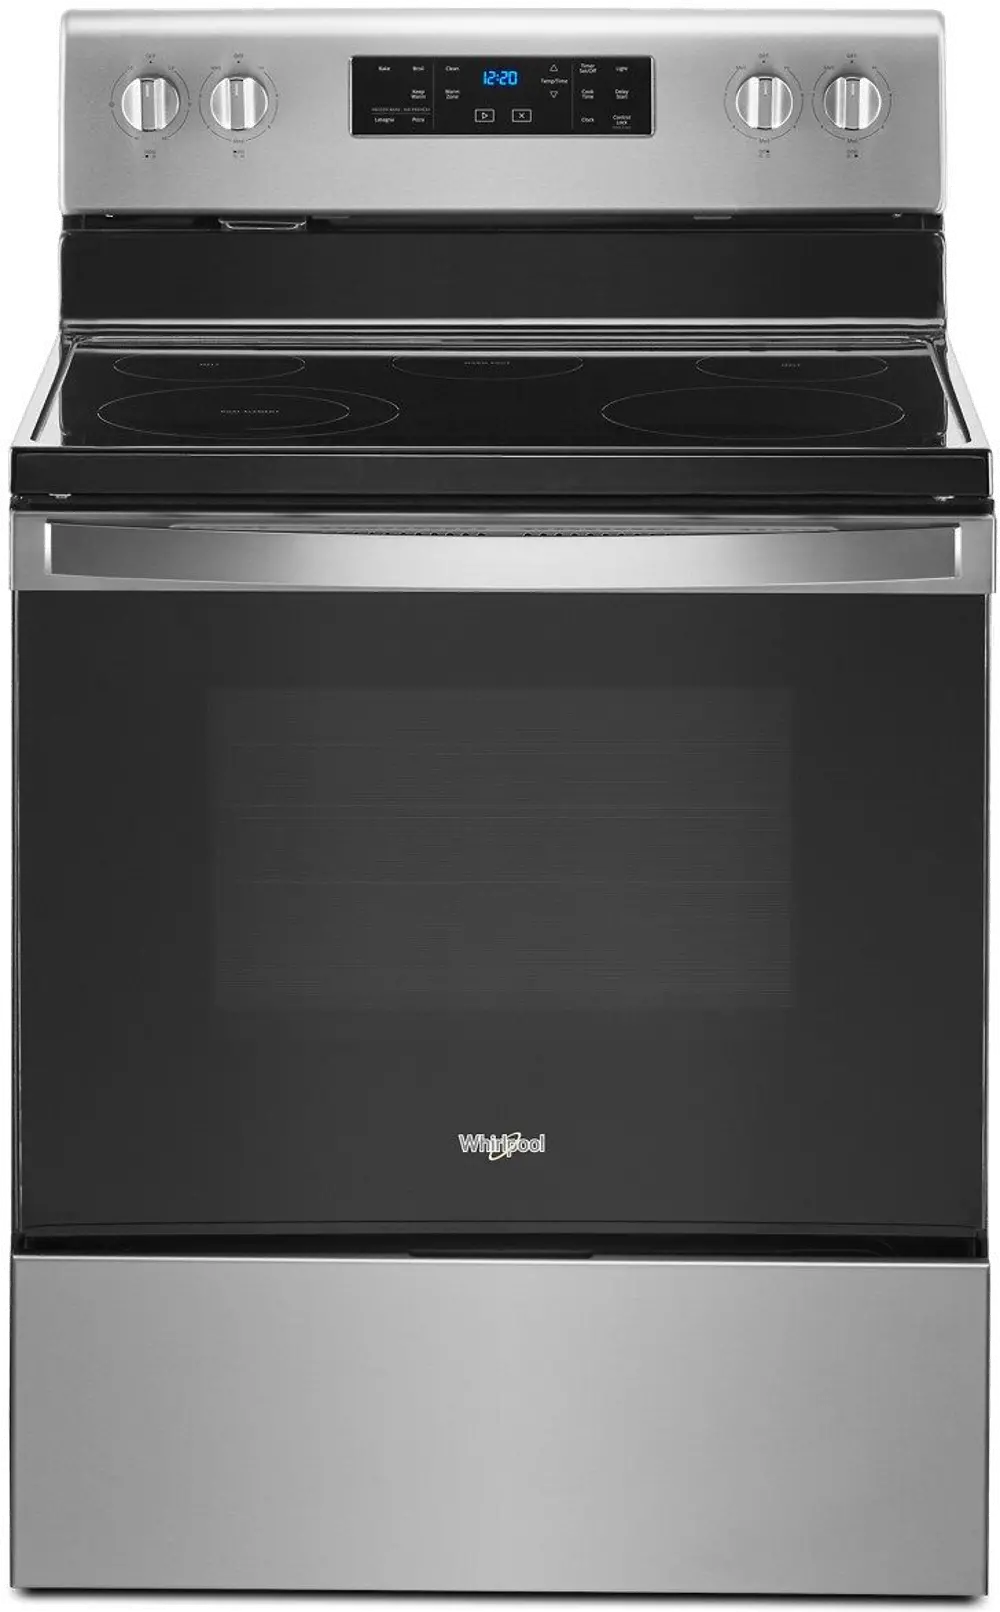 WFE525S0JS Whirlpool 5.3 cu ft Electric Range - Stainless Steel-1